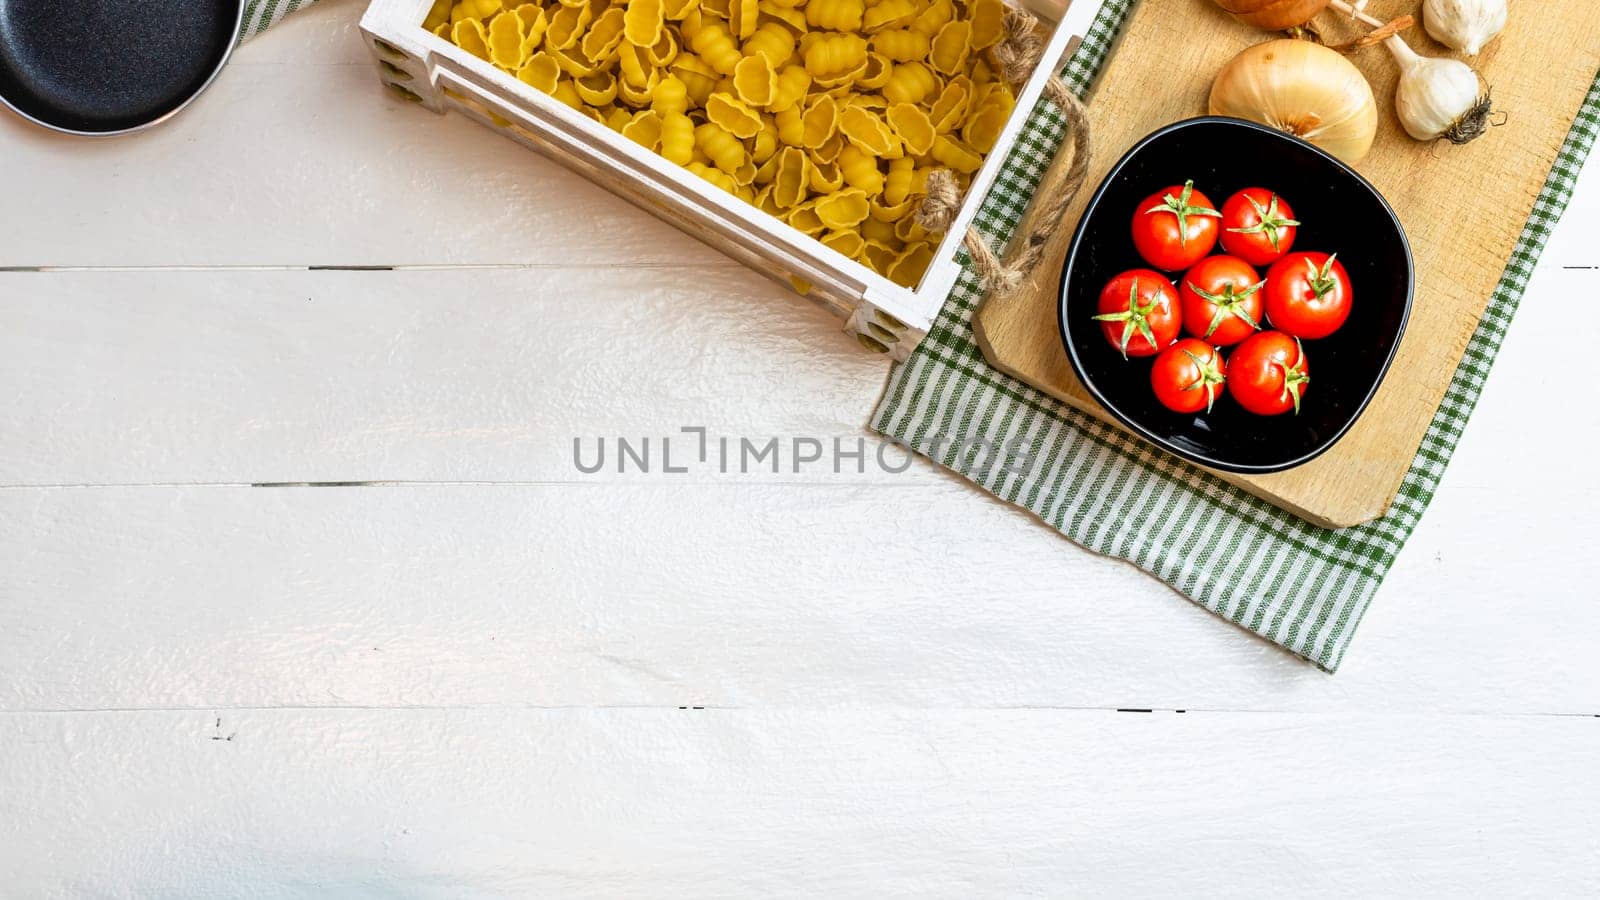 Beautiful tasty Italian pasta, tomatoes, onions and garlic for cooking pasta by vladispas